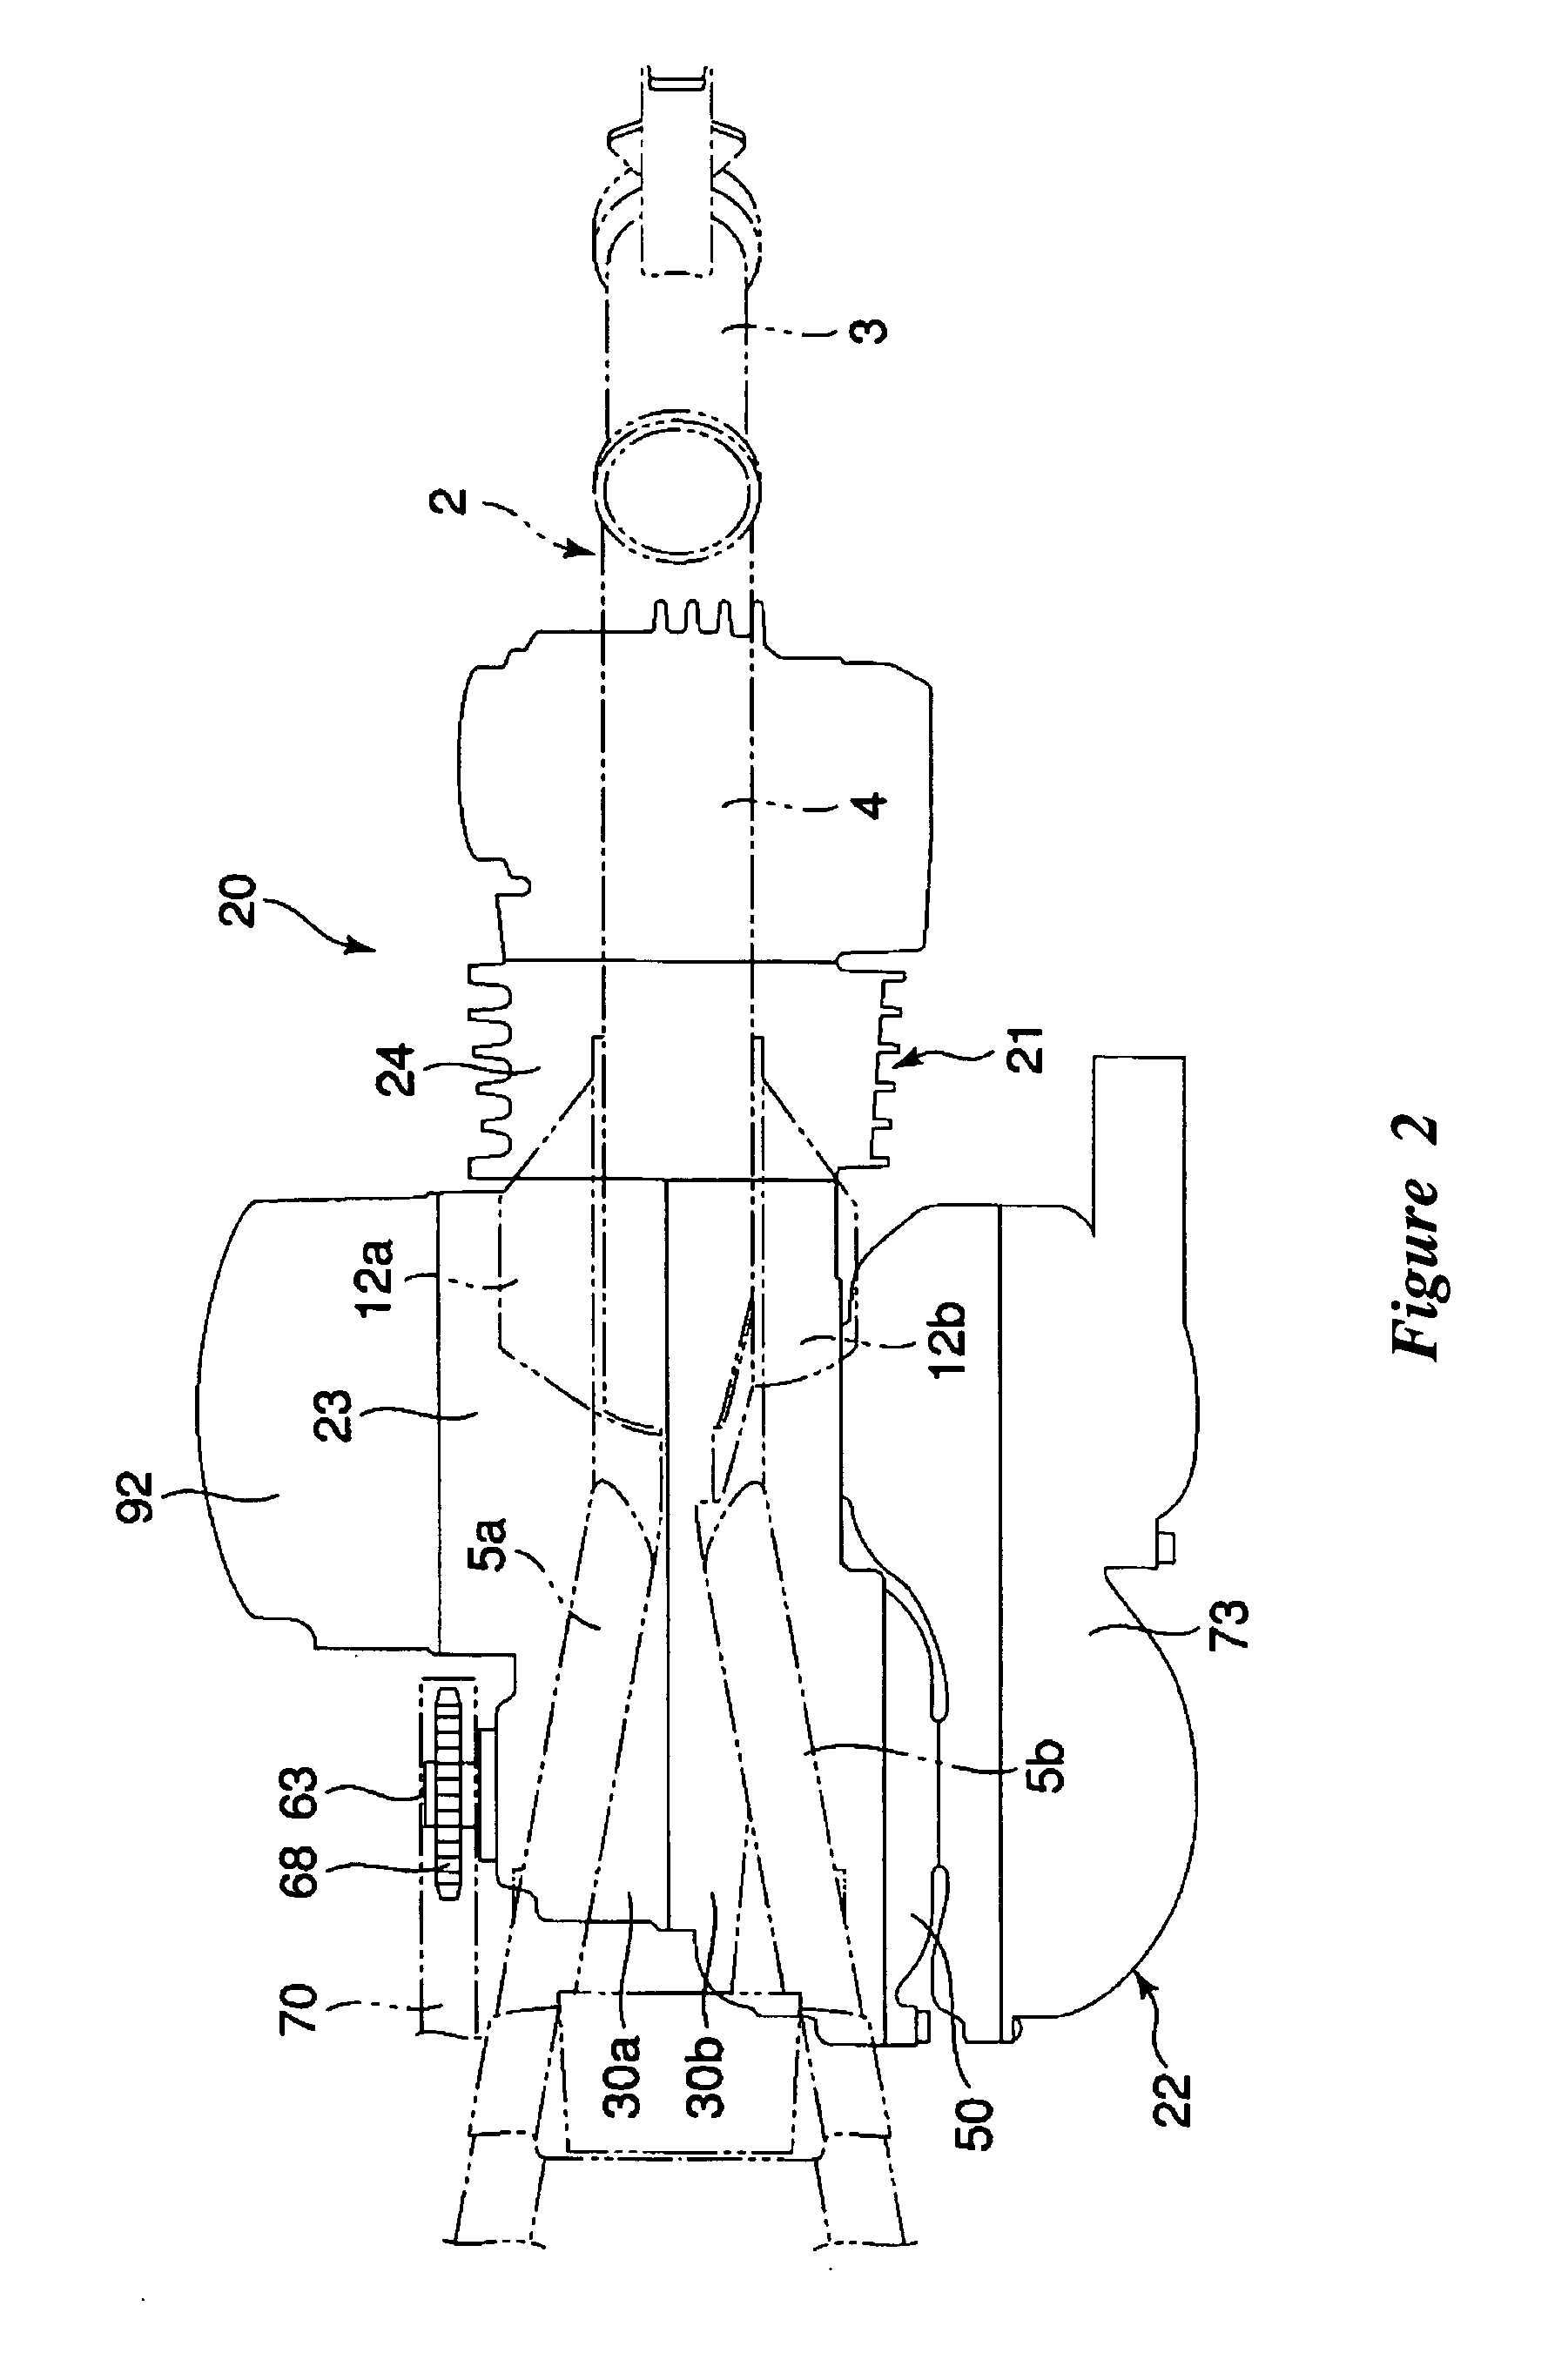 Engine mounting arrangement for two wheeled vehicle